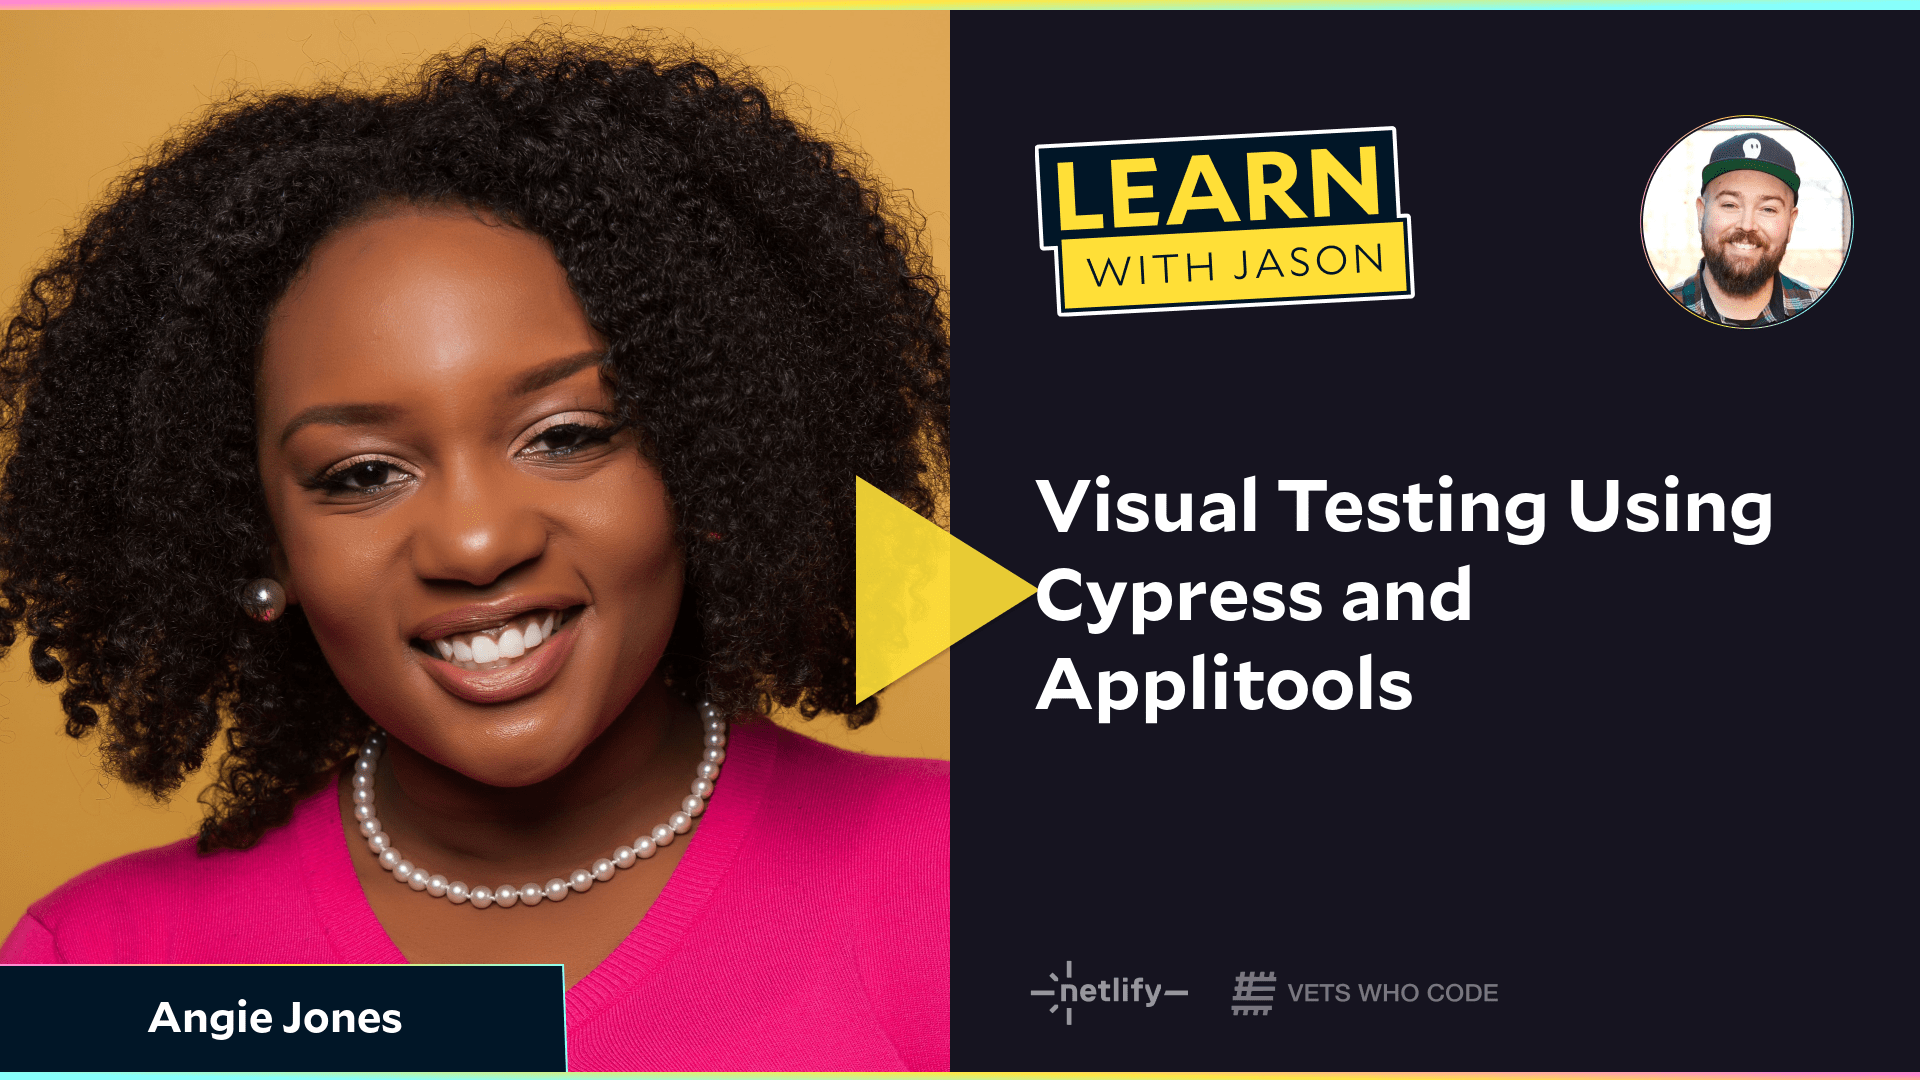 Visual Testing Using Cypress and Applitools (with Angie Jones)